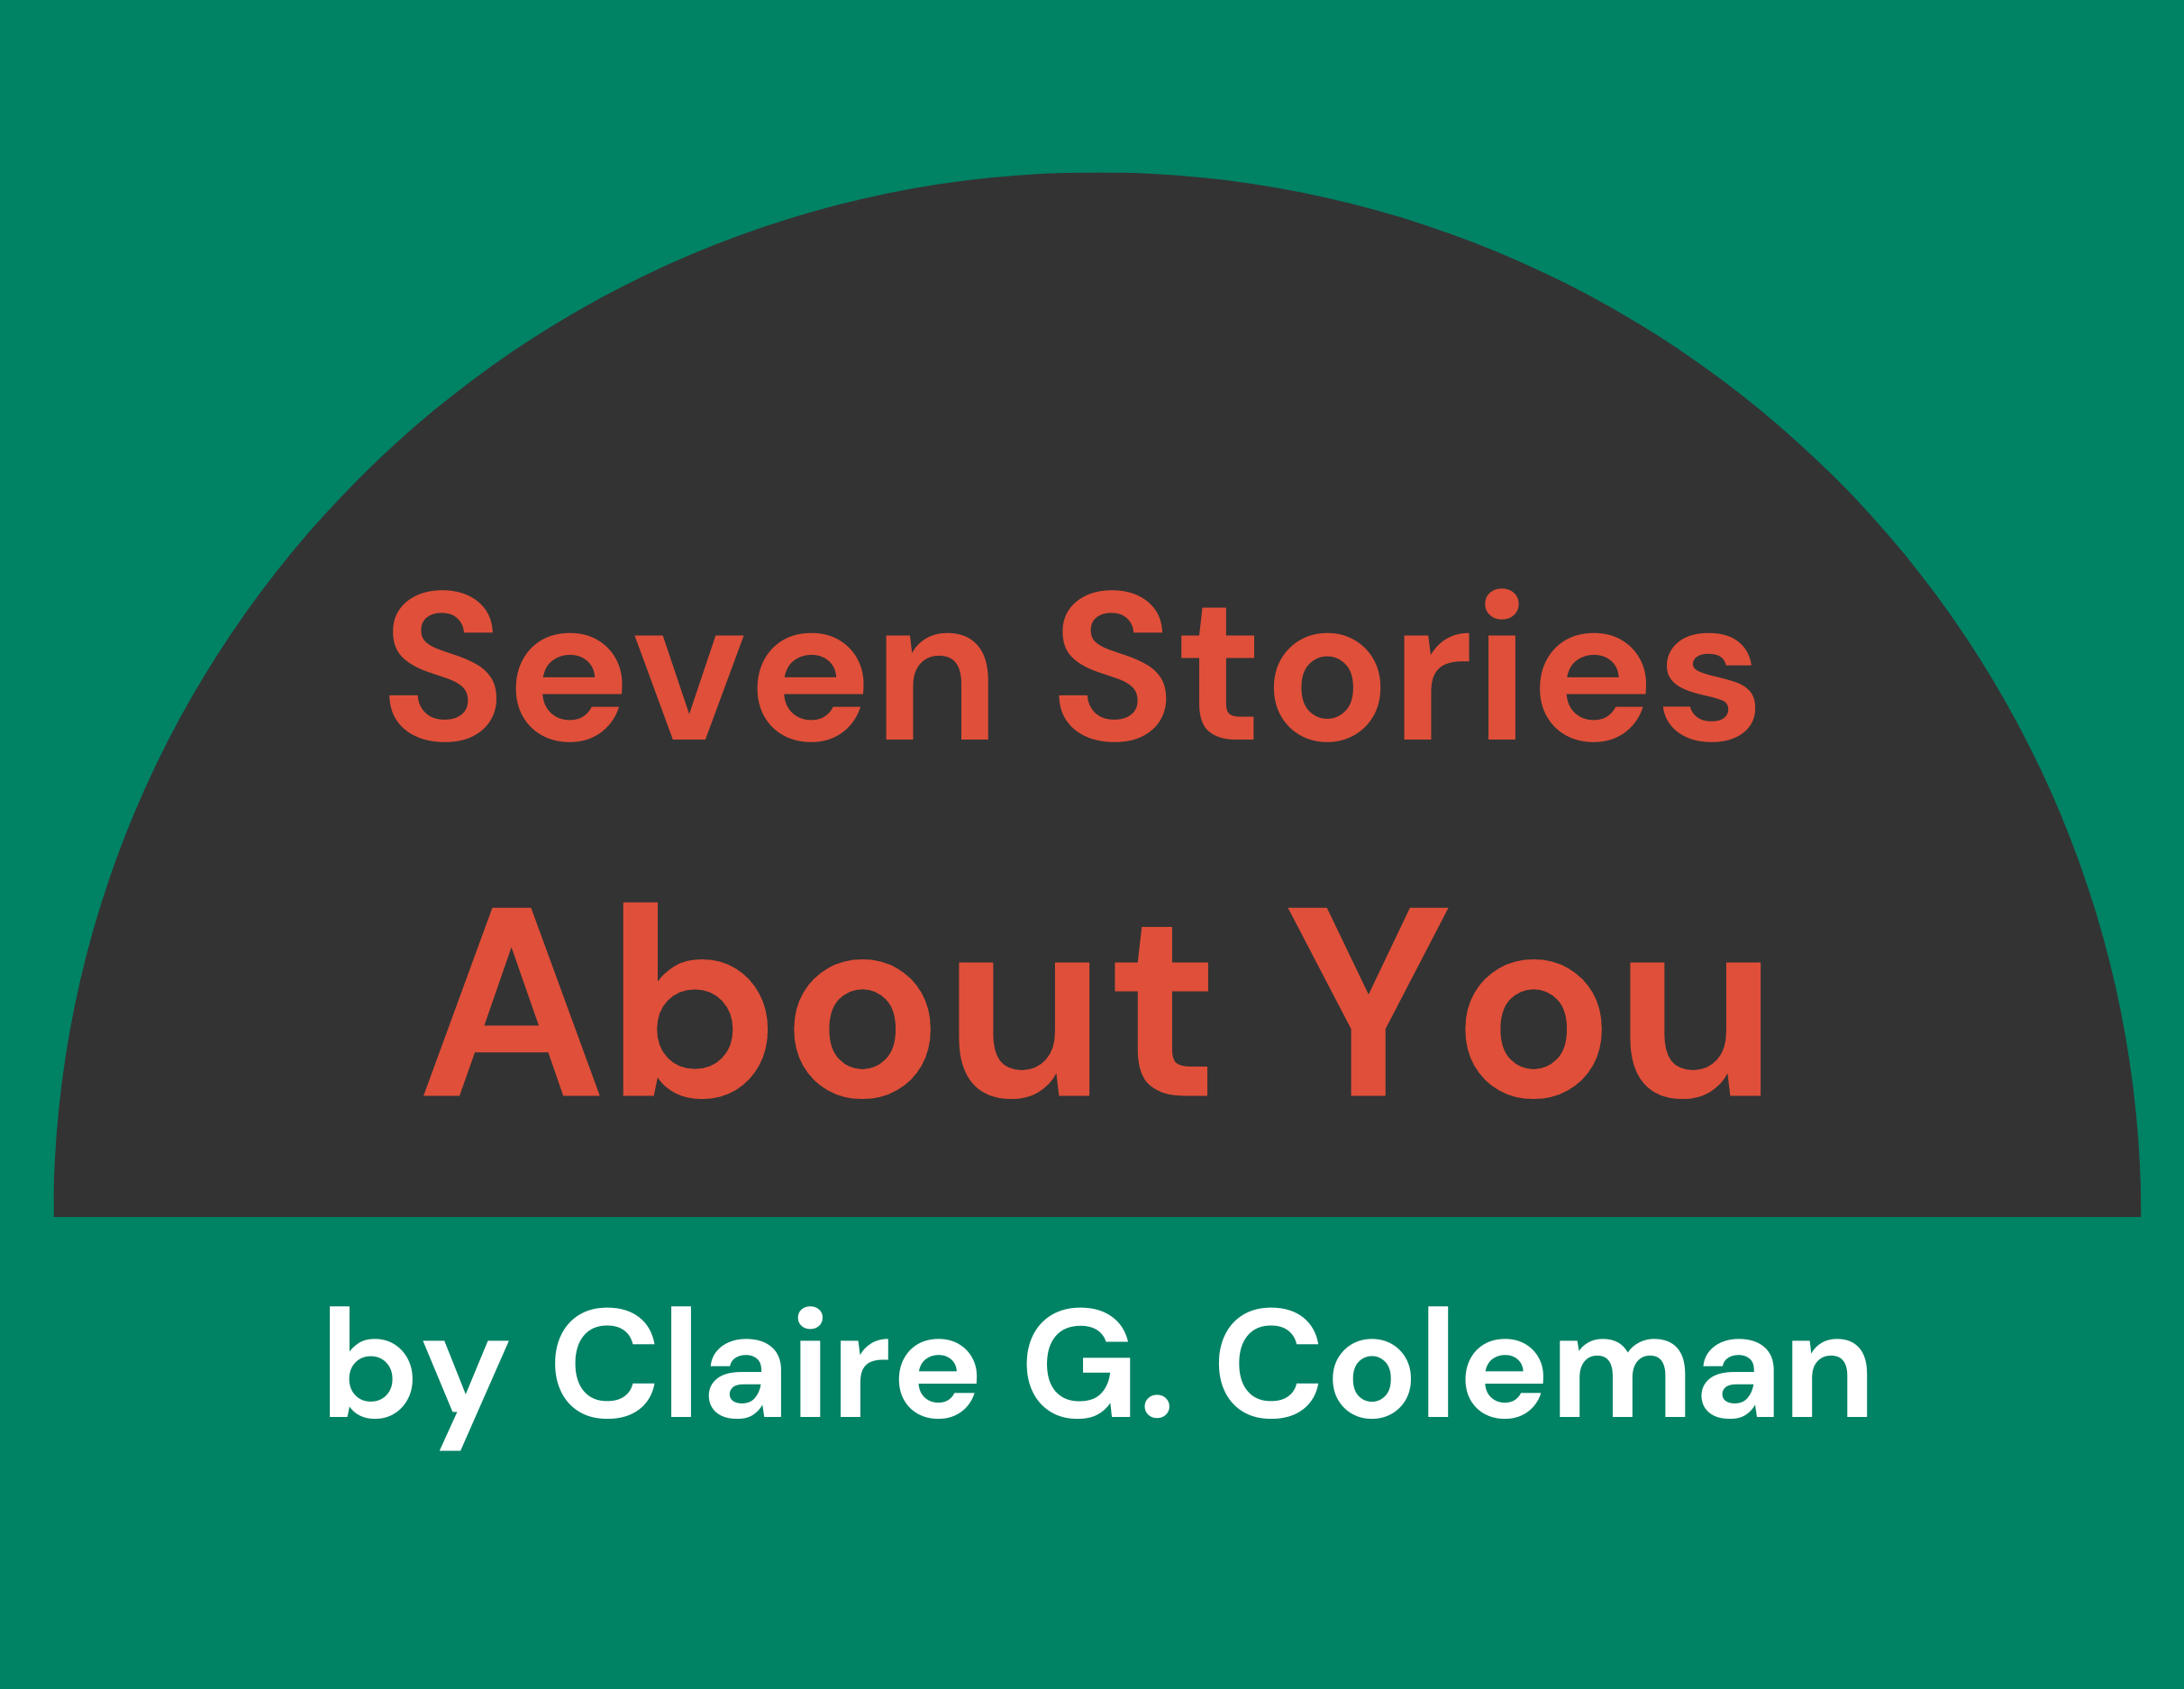 Seven Stories About You